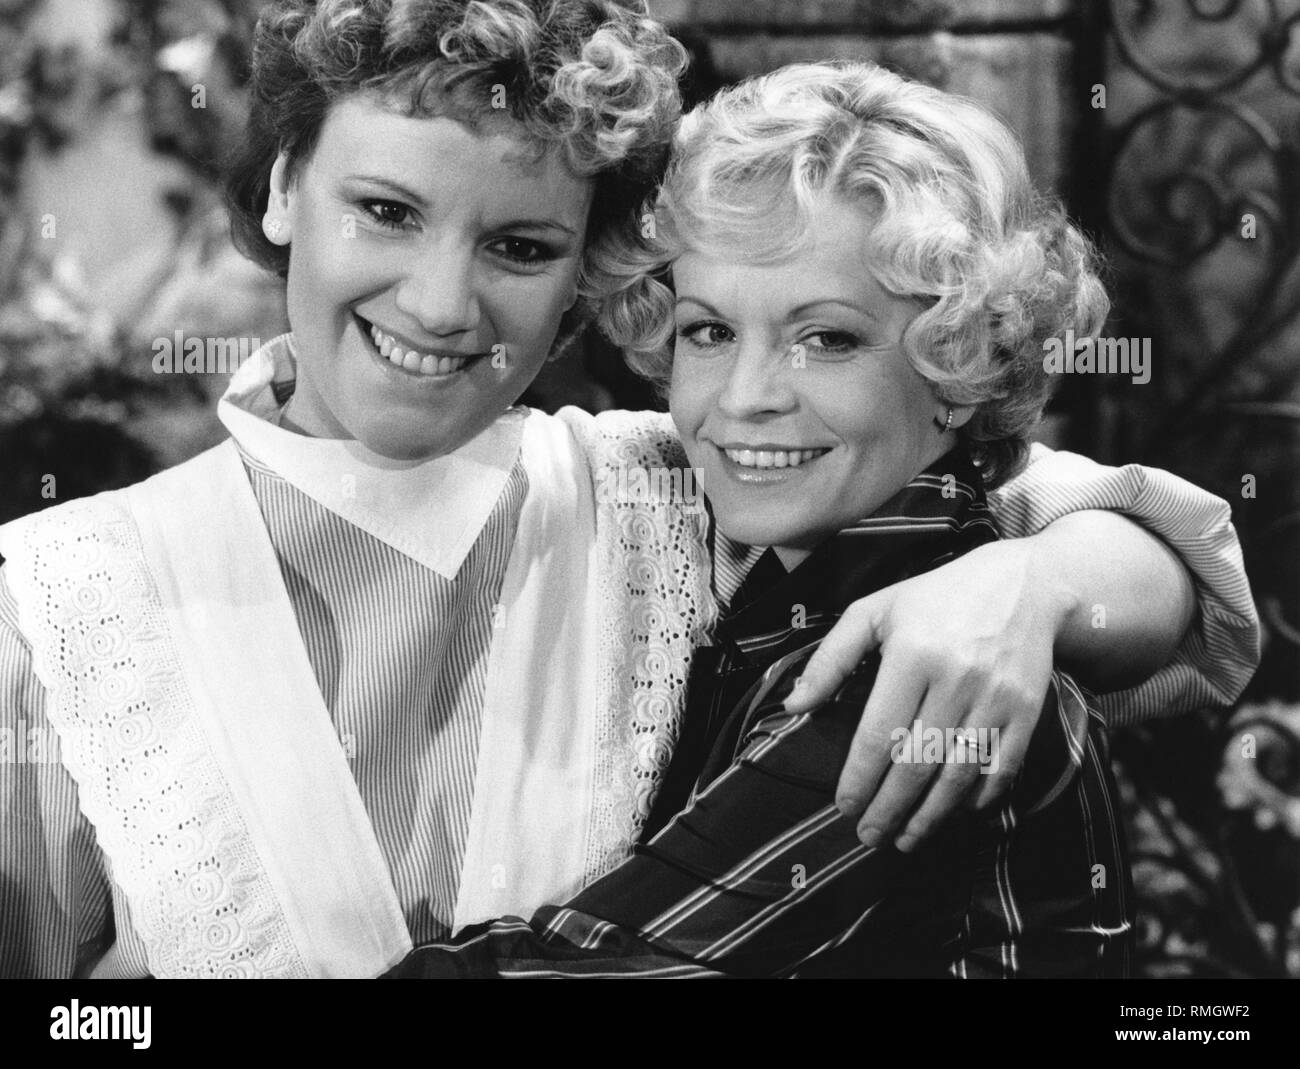 Actresses Mariele Millowitsch and Barbie Millowitsch-Steinhaus. Stock Photo